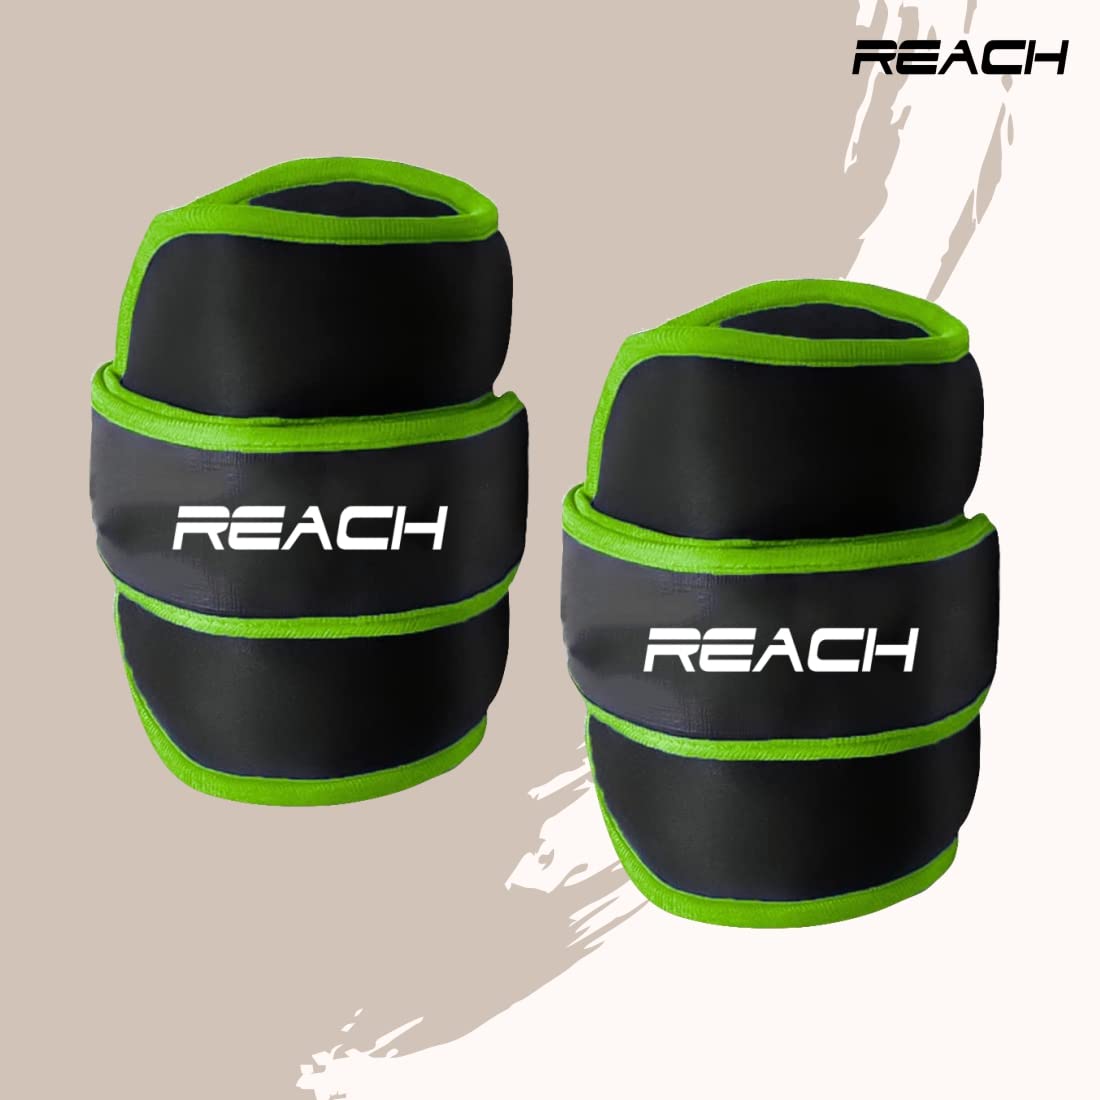 Reach Premium Adjustable Ankle Weights | Cuff Weights| Wrist Weights for Men & Women for Fitness Walking Running Toning Jogging Exercise Gym Workout. (1 kg, Green)